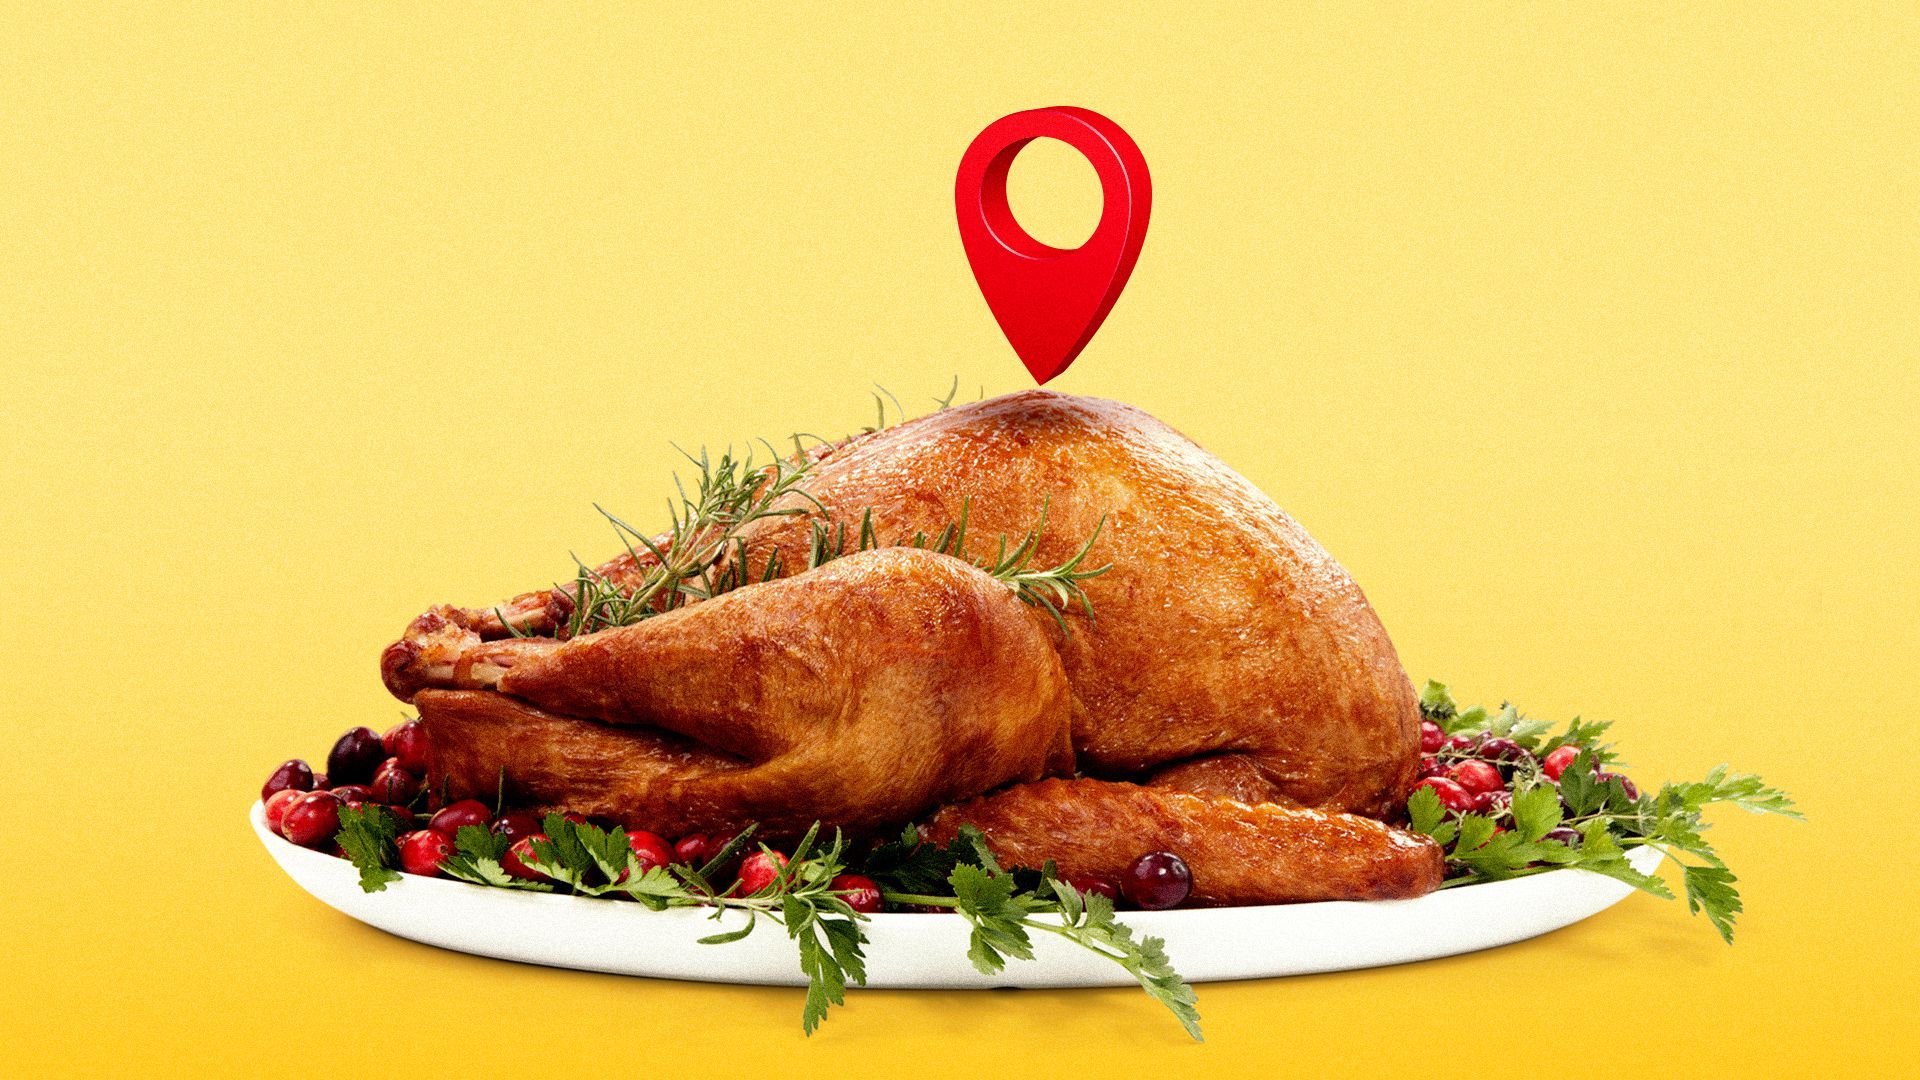 Illustration of a turkey with a navigation pin hovering above it.